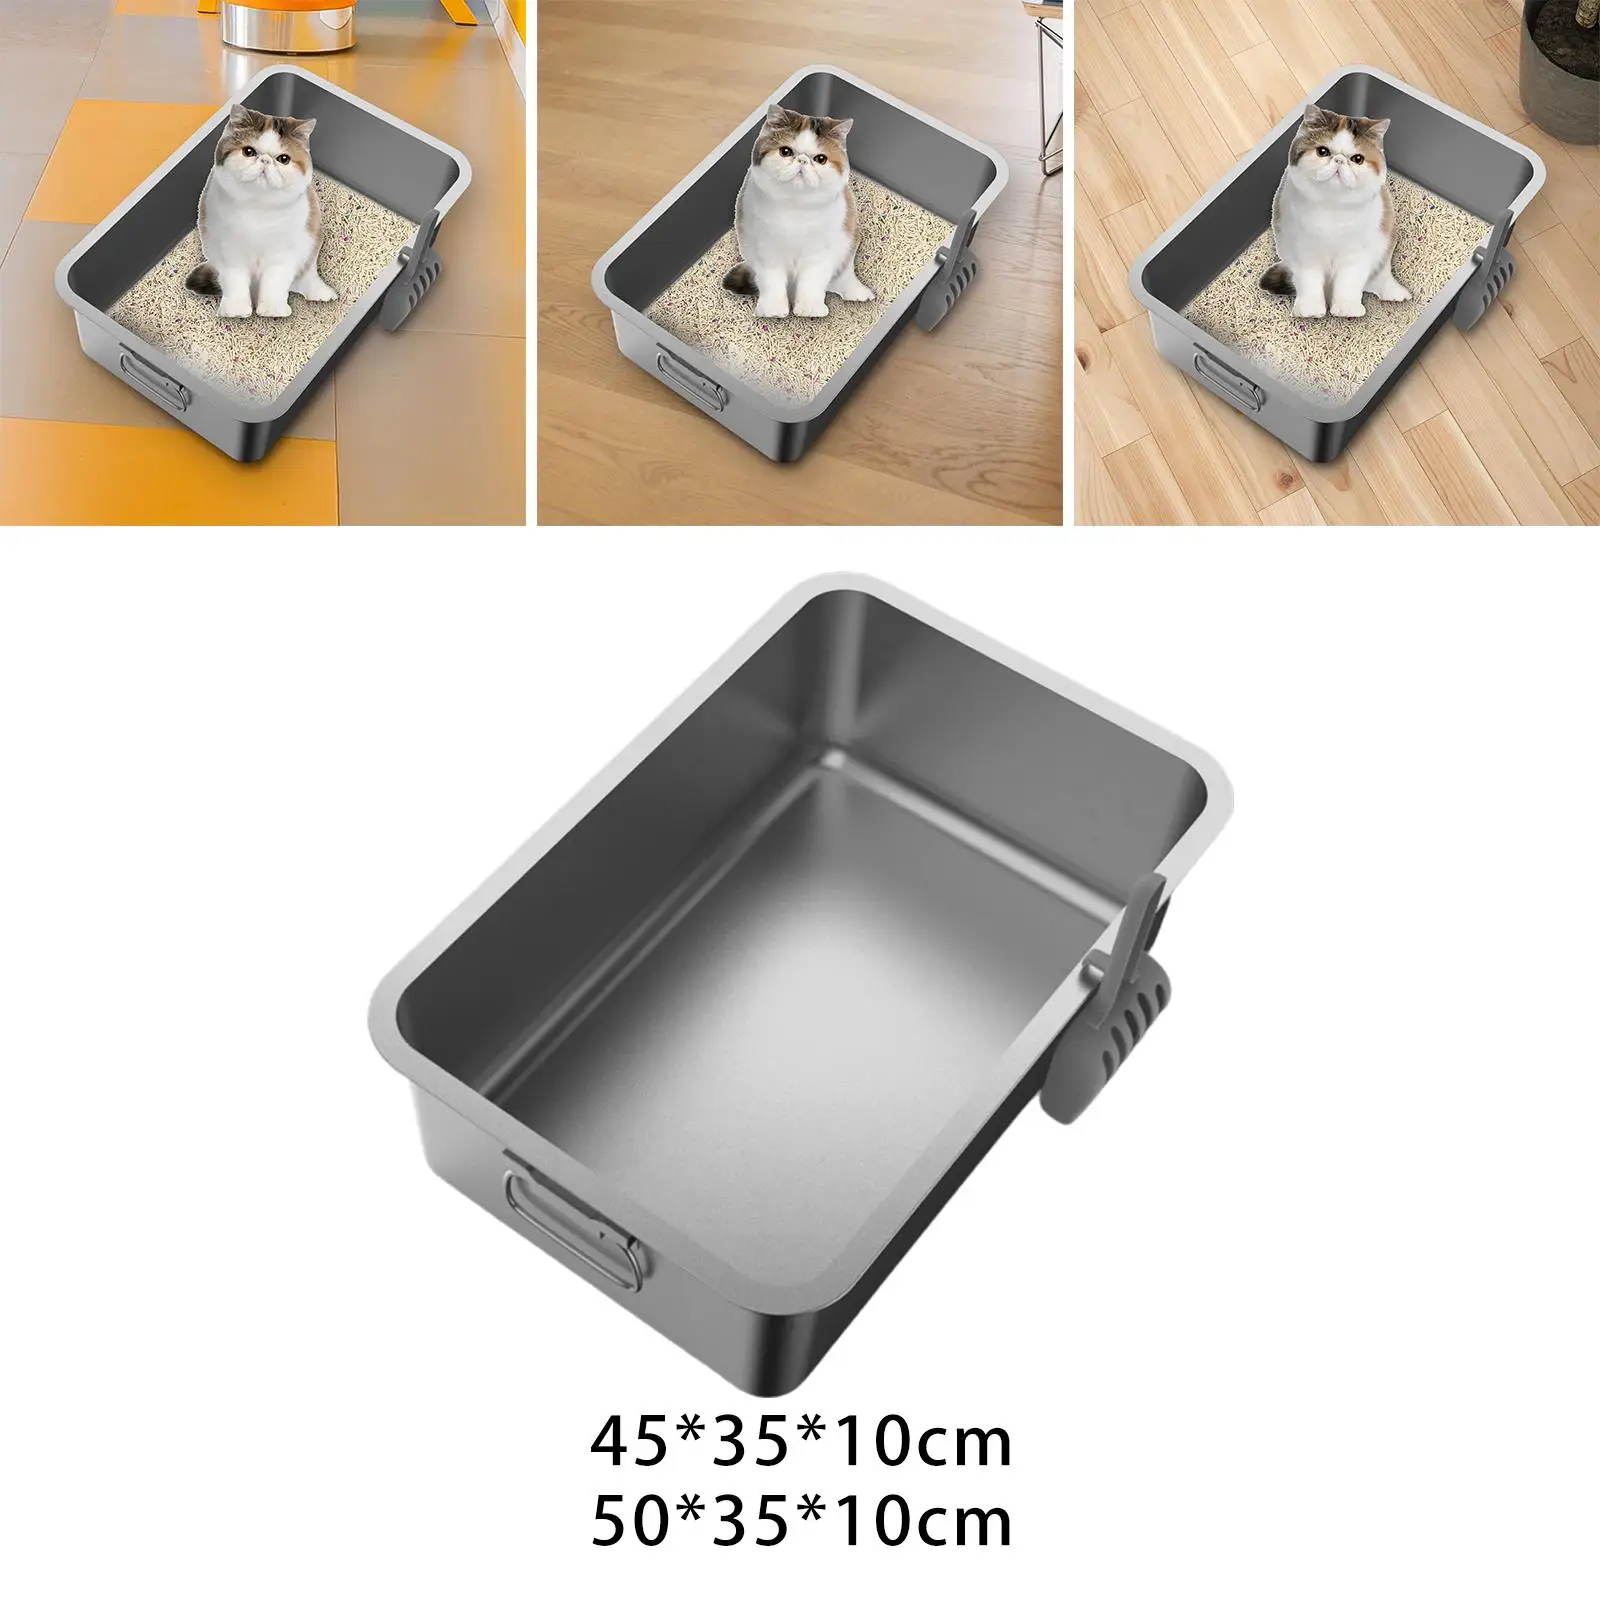 Kitten Cat Stainless Steel with scoop Accessories Rust Resistant Anti Splashing Rounded Edges Semi Enclosed Simple to Clean